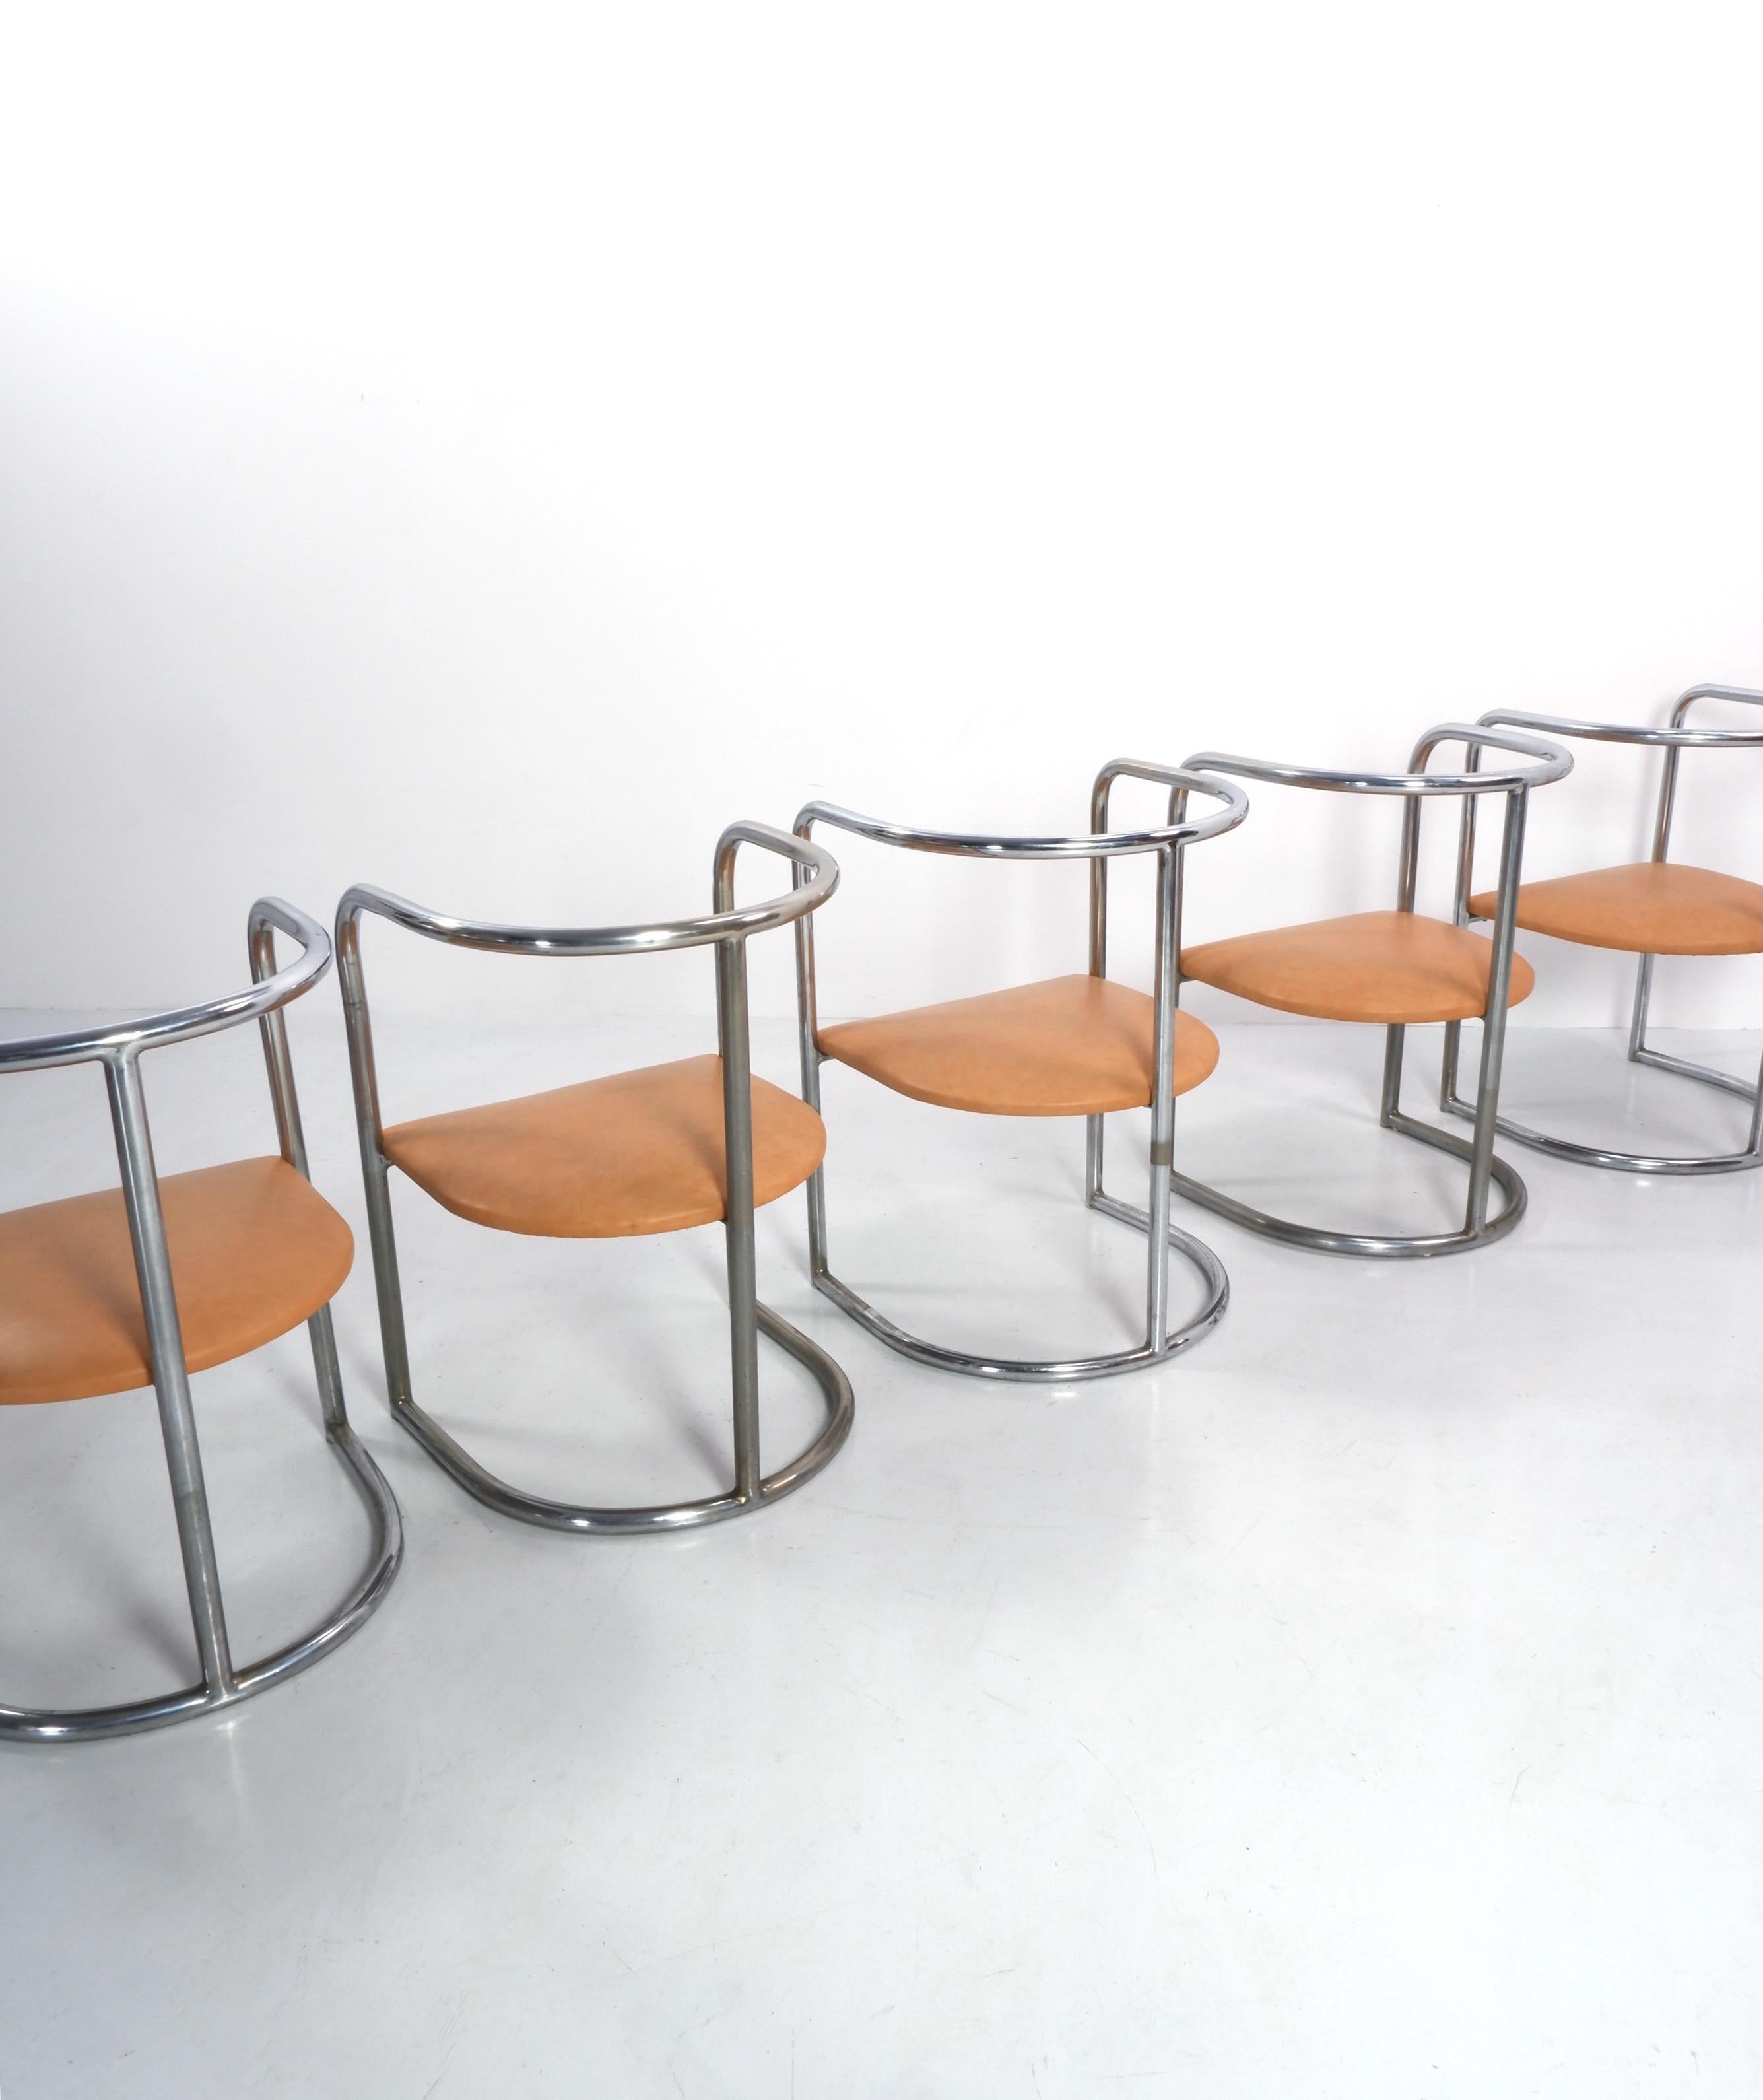 Set of 5 Tubular Dining Chairs attrb. Djo Bourgeois, France, c.1930 1